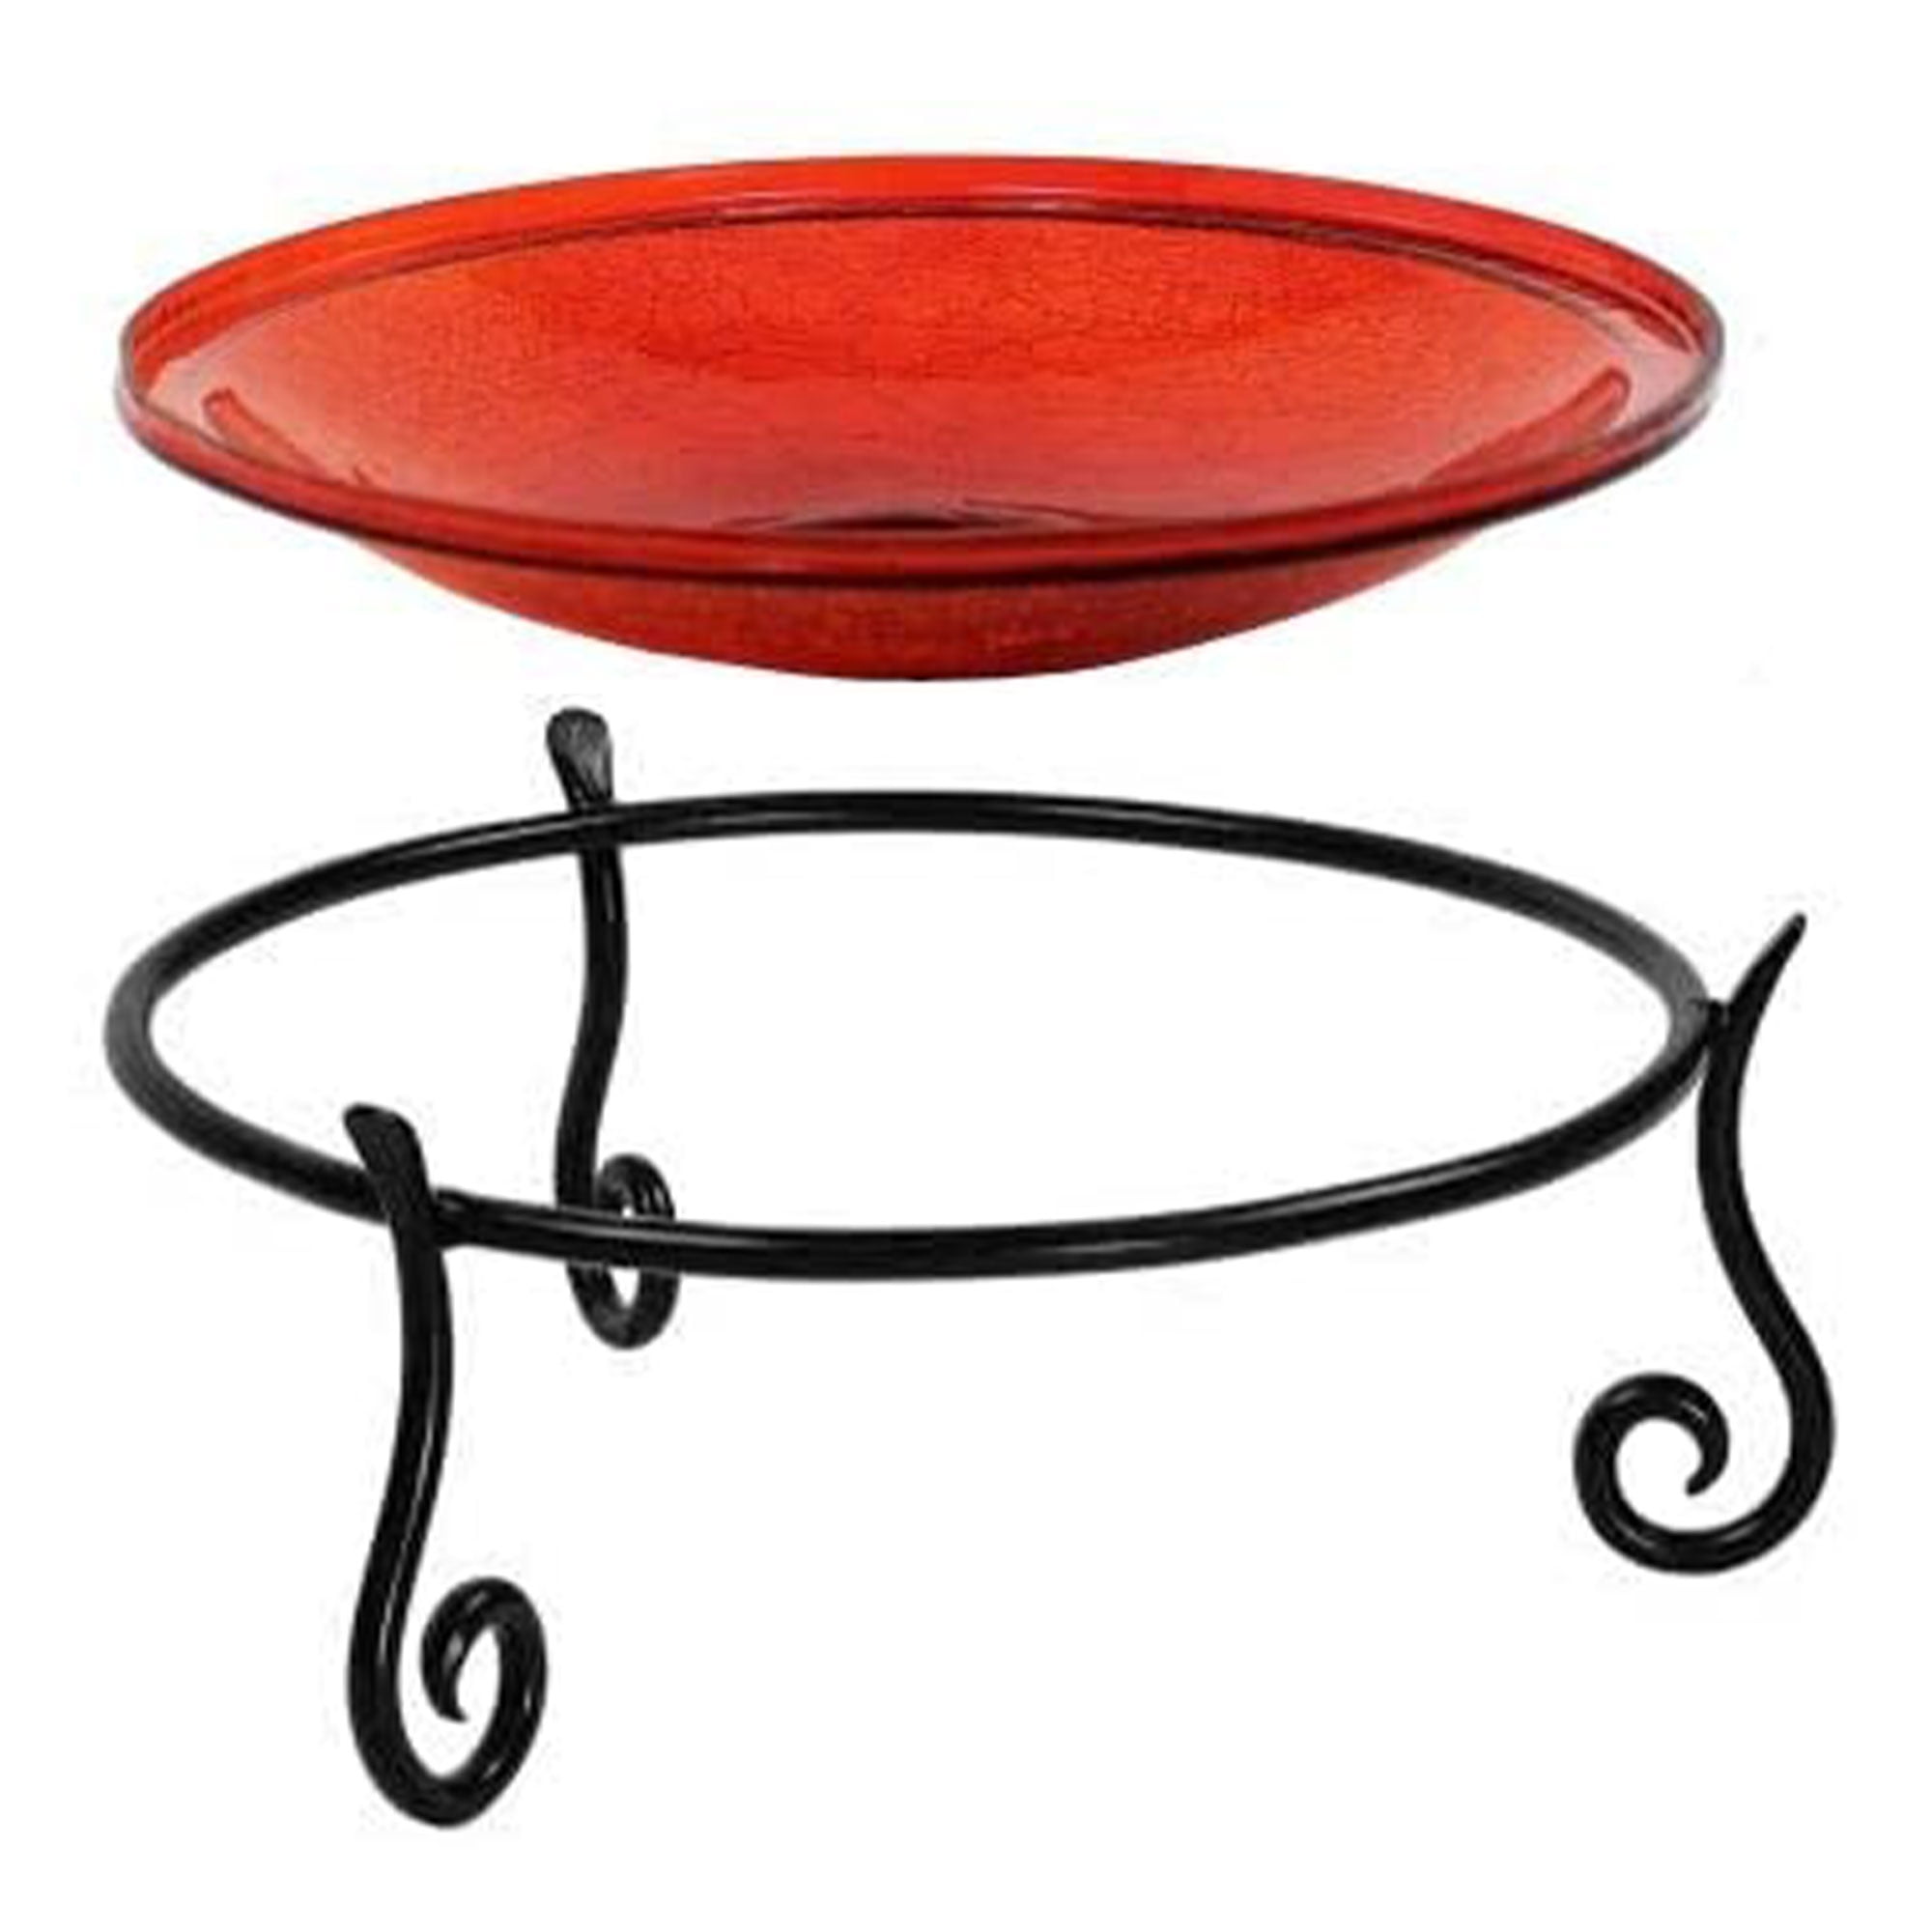 Picture of Achla CGB-14R-S2 14 in. Red Crackle Birdbath with Short Stand II